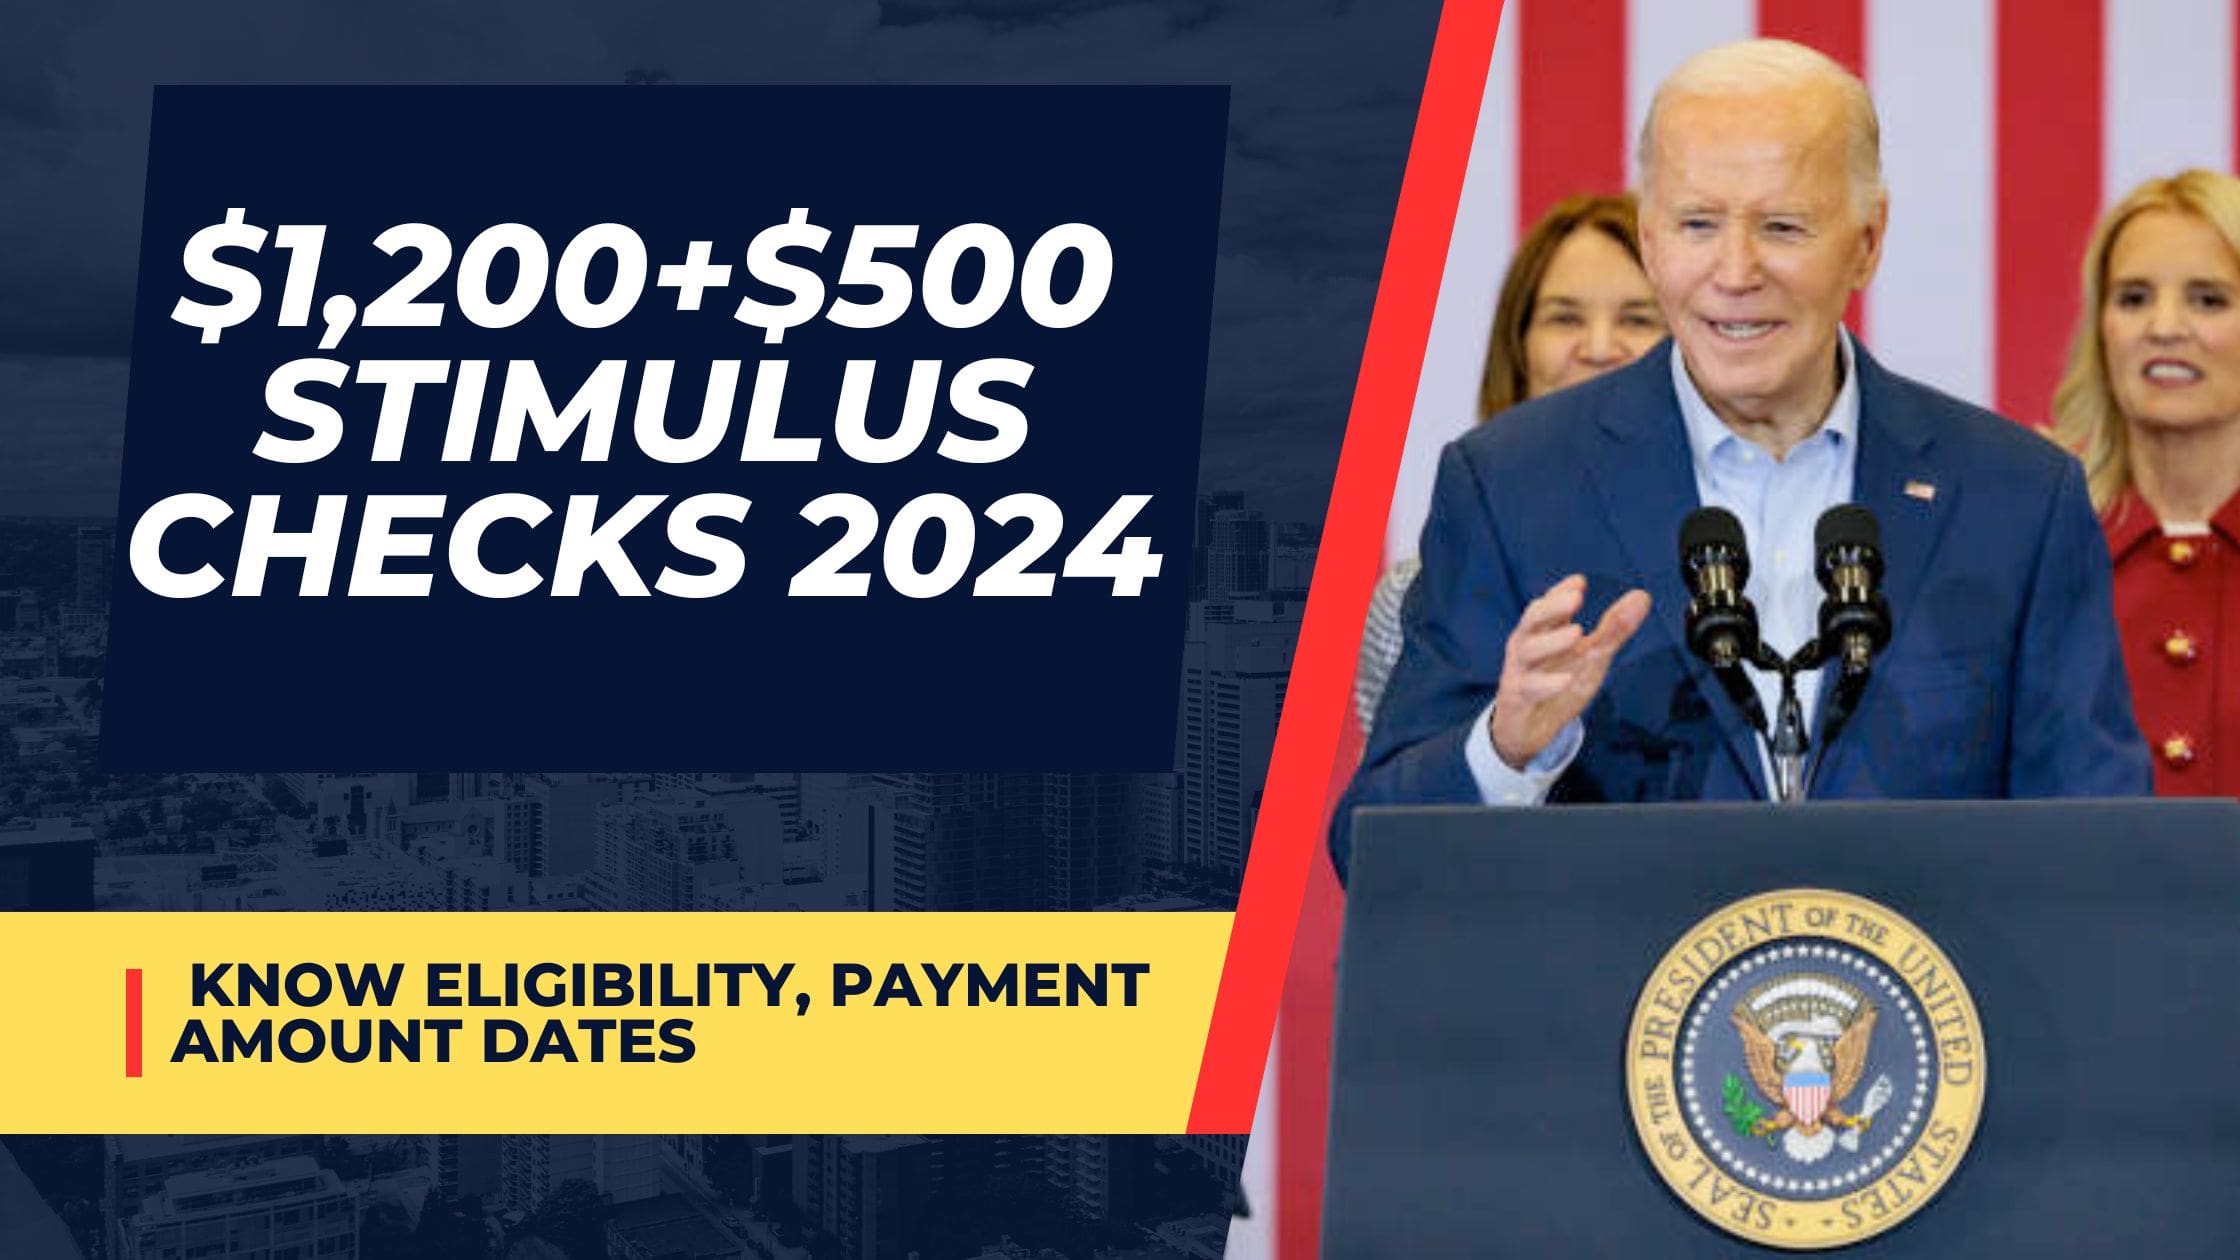 $1,200+$500 Stimulus Checks 2024 Coming - Know Eligibility, Payment Amount Dates & Latest Status